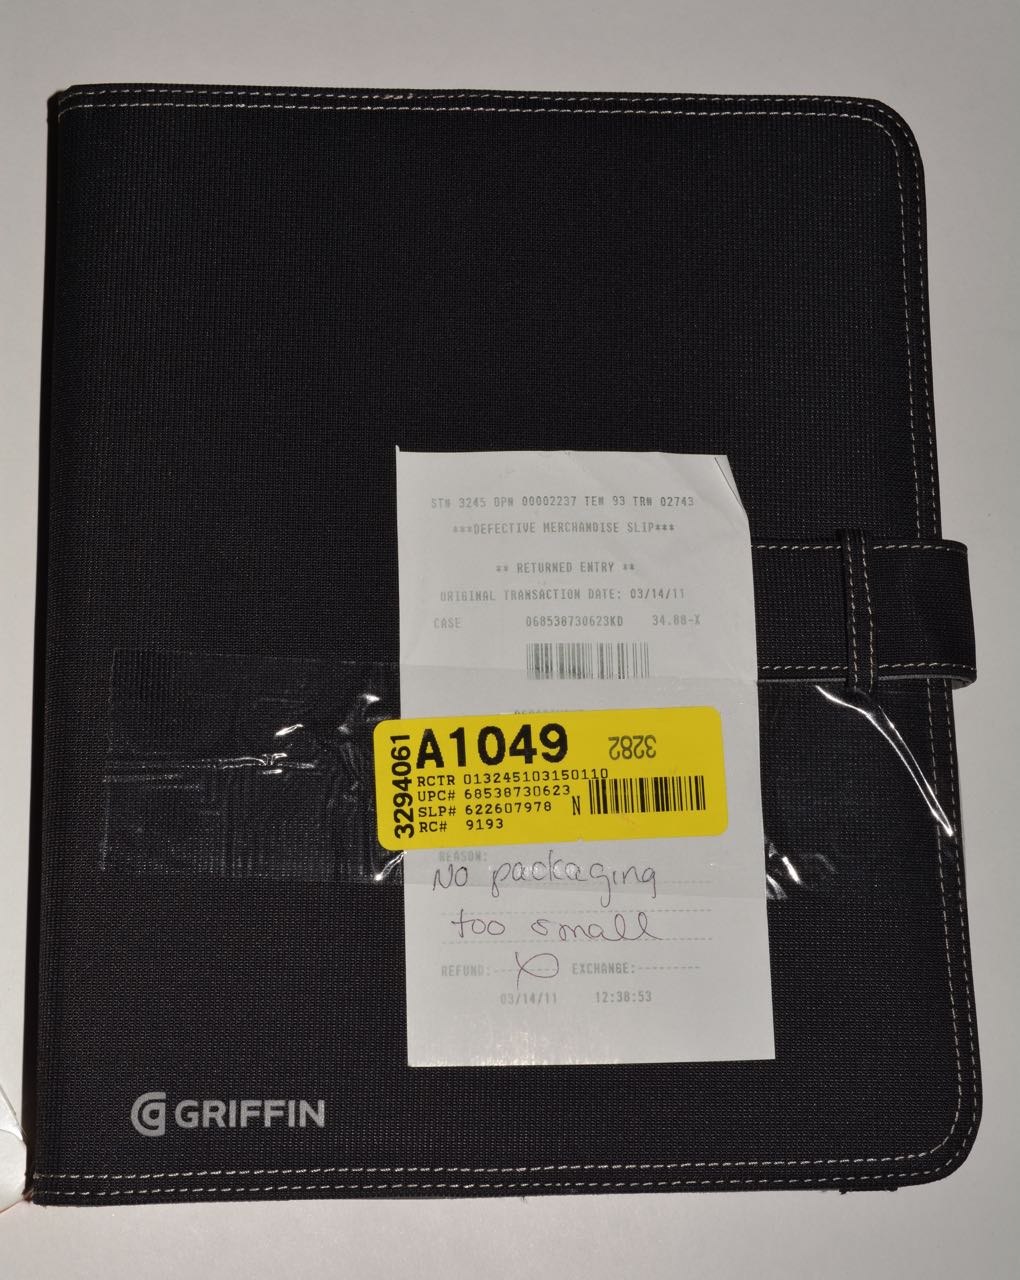 Assorted Griffin Mobile Device Accessories - 800 - Bins may include but are not limited to:</strong> Air Strap holders for iPad (1st generation), Standle Display & Carry Case for iPad, Outfit Ice for iPad, Slap Case for iPod nano (2nd generation), Elan Passport Graphite Cases for iPhone (1st generation) iPod Nano (2nd generation) silicone cases, Tune Buds (earphones), hard shell cases for iPod Touch (2nd gen), ultra thin protection covers, cases with armband &amp; clip for iPod, iPod and iPhone armbands, leather slim sleeves for iPod Nano, iPhone cases (3G)